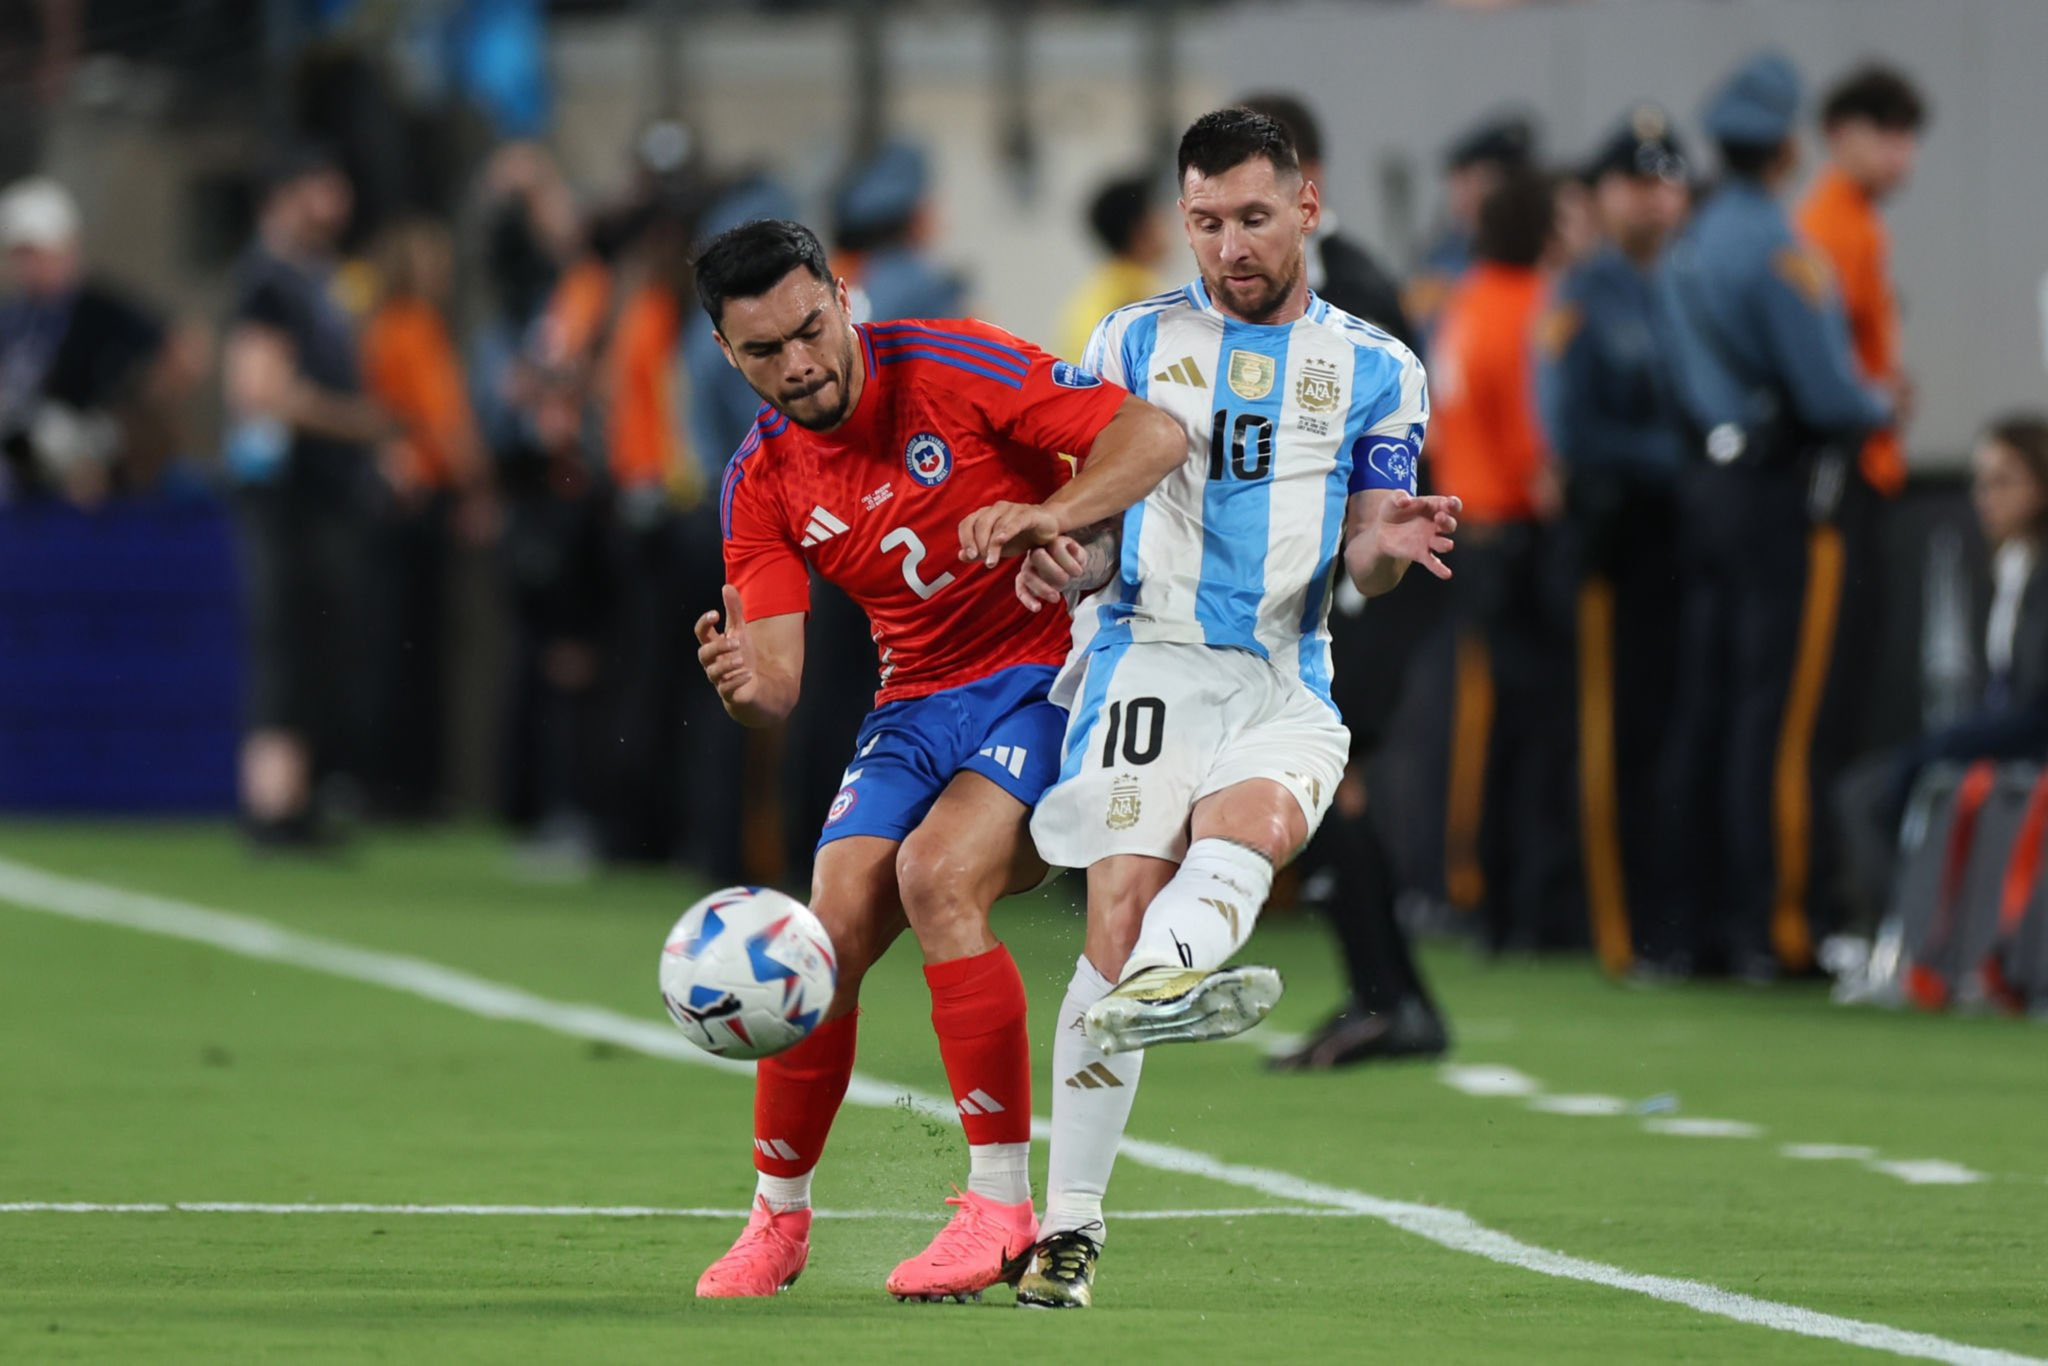 Argentina reserves the first ticket to the Copa America quarterfinals